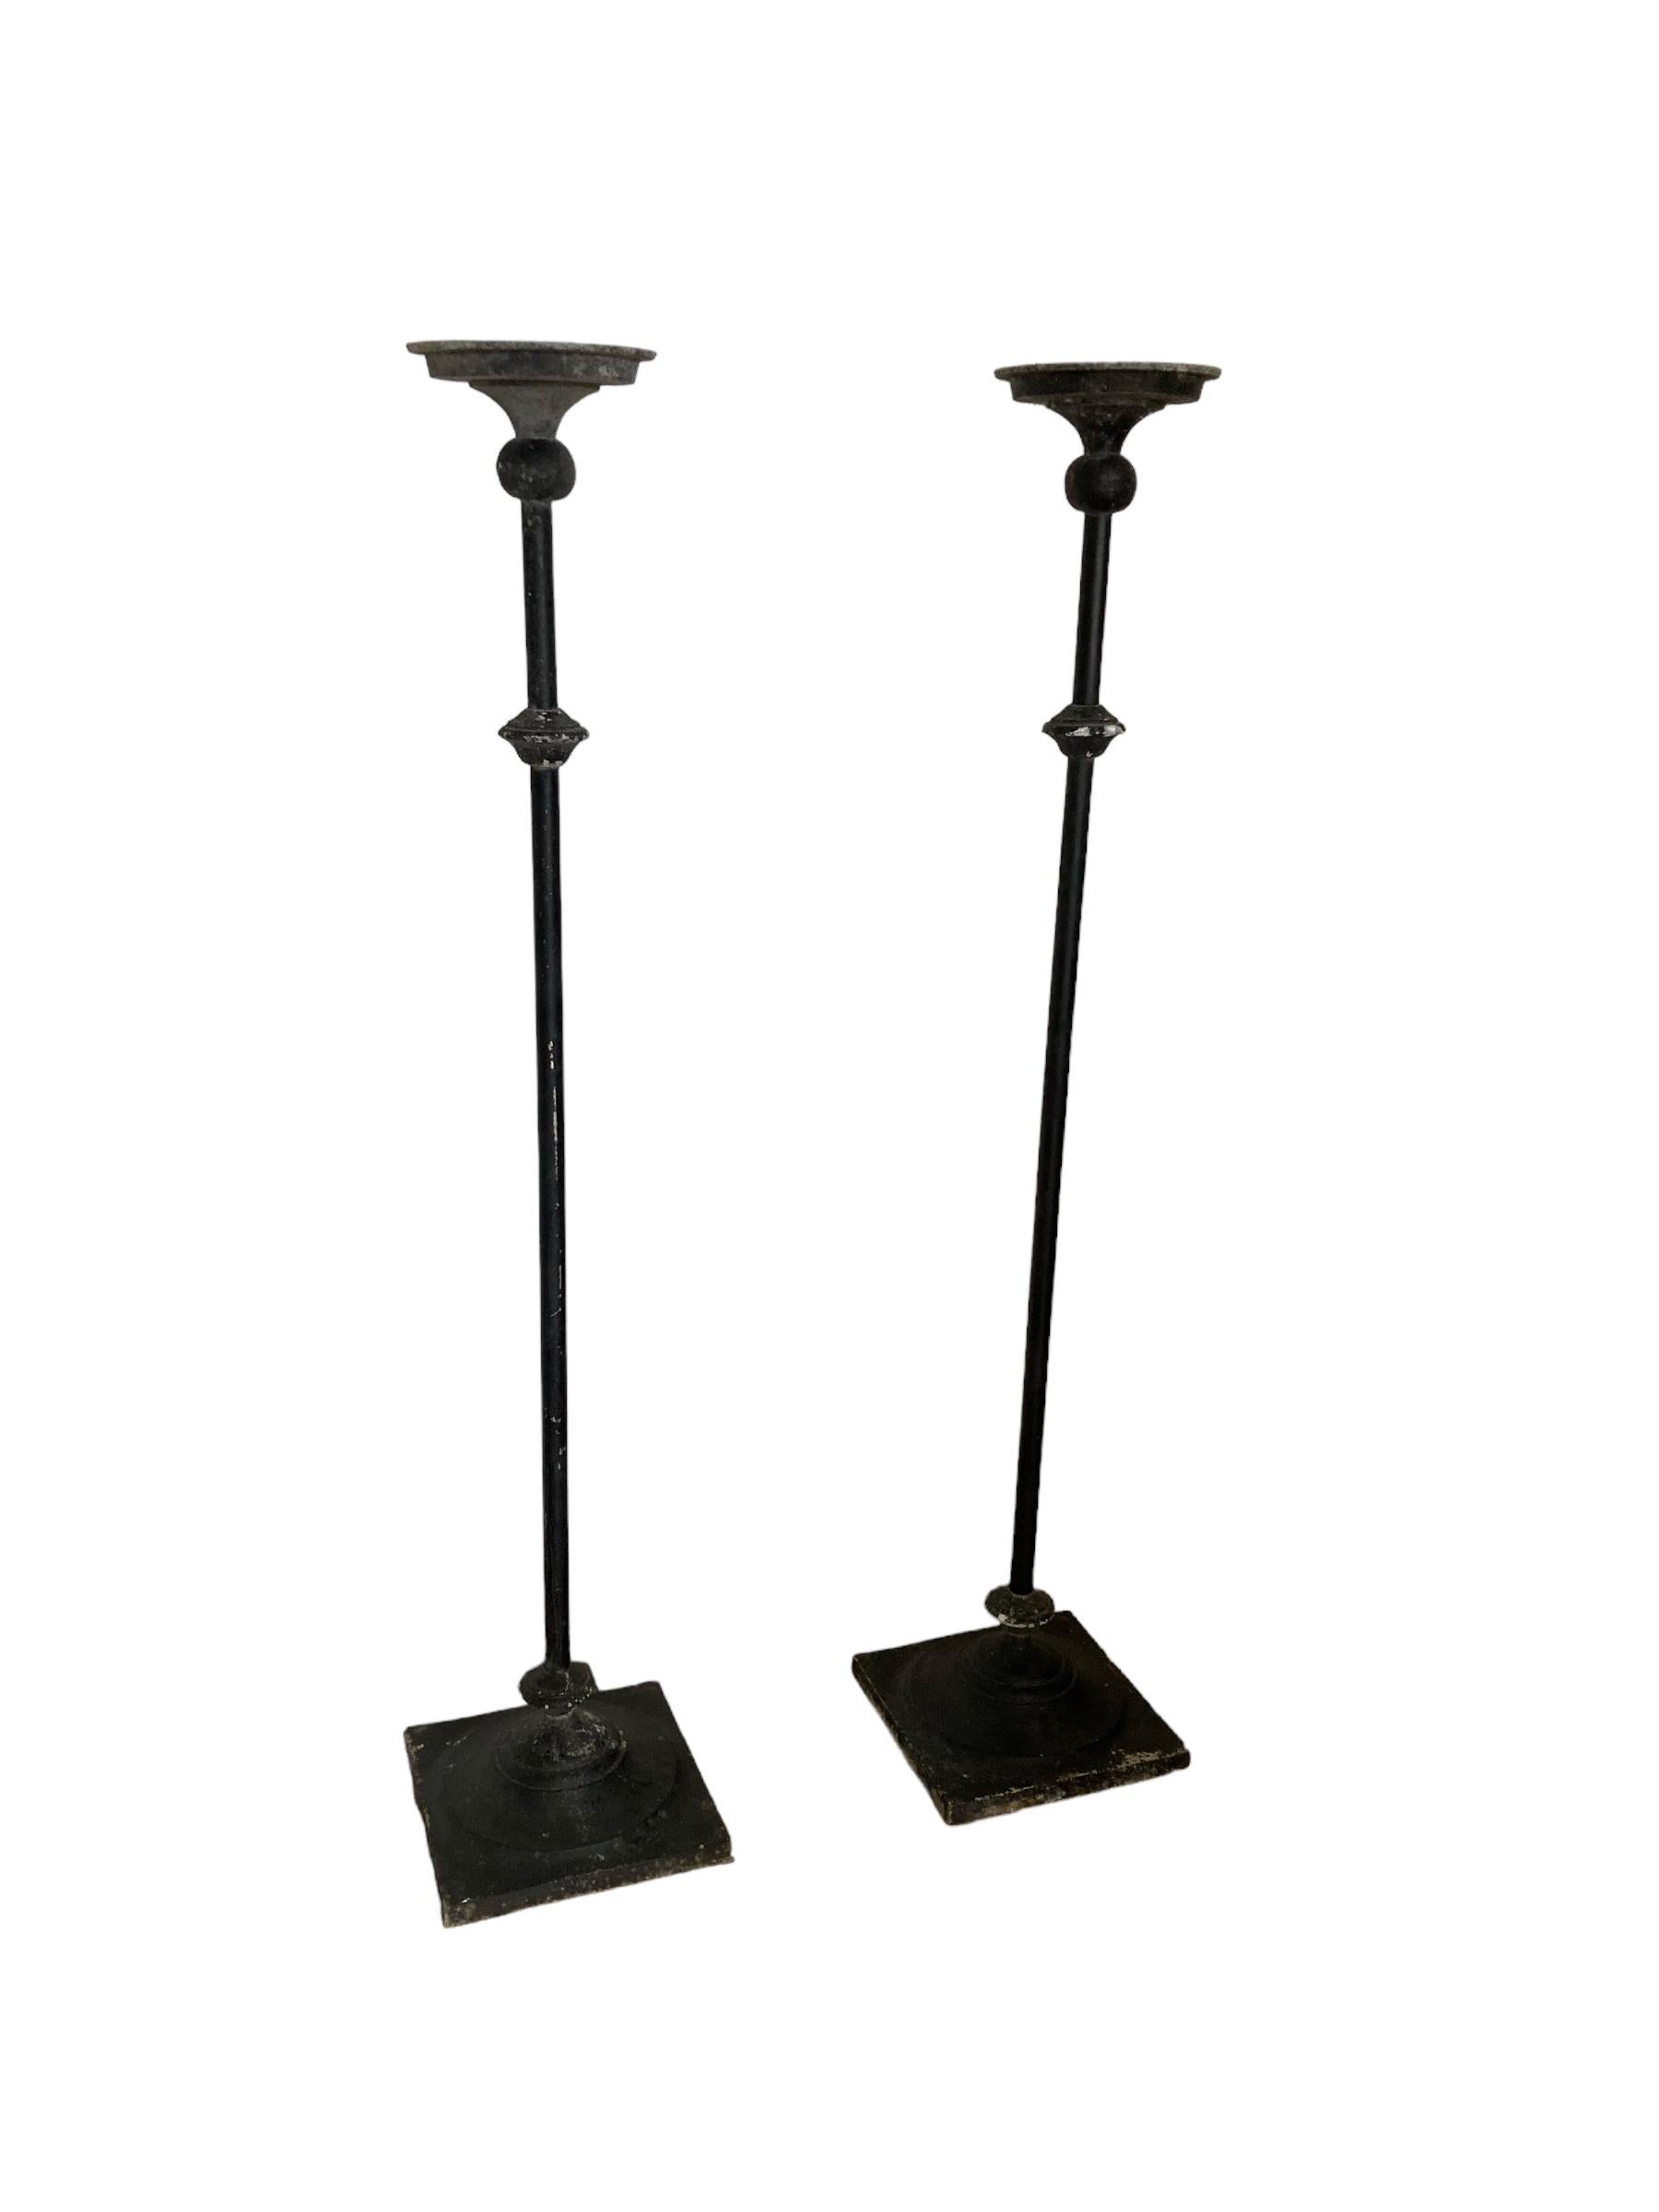 British A Pair of Tall Wrought Iron Church Floor Candle Holders Gothic Style For Sale